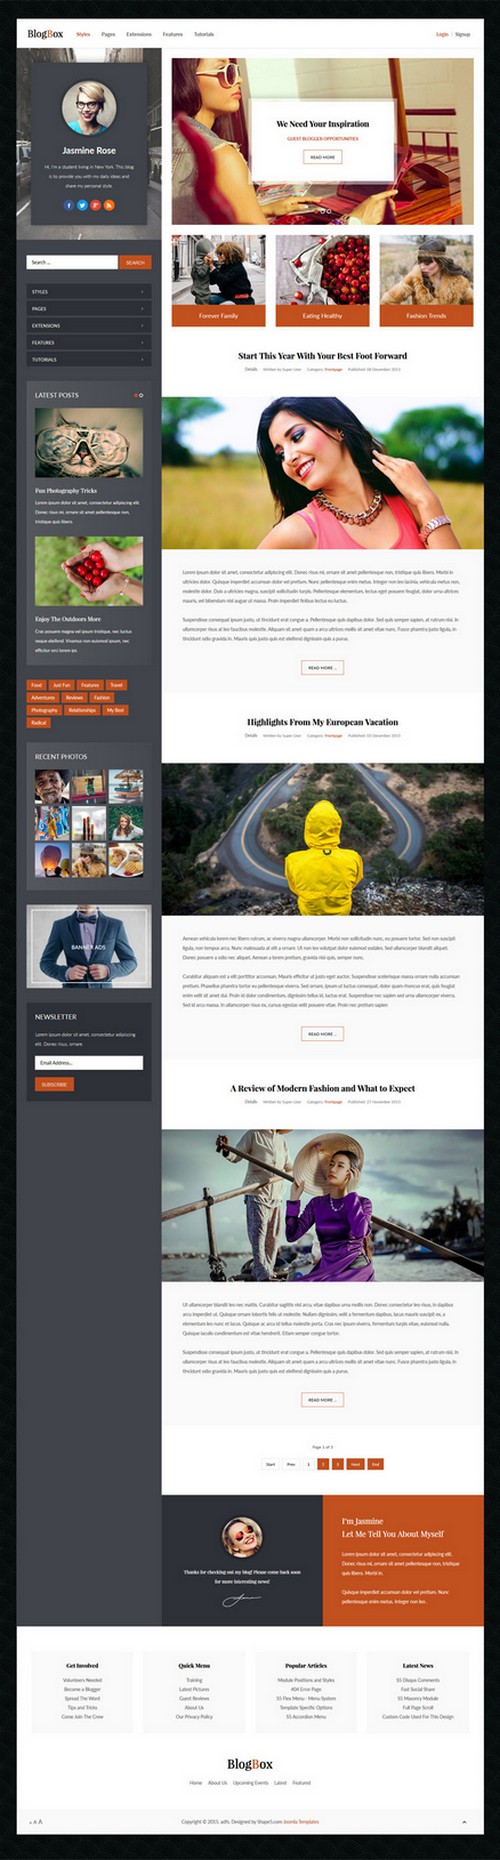 Blogbox - Authors, Bloggers and Publishers Joomla 4 Template